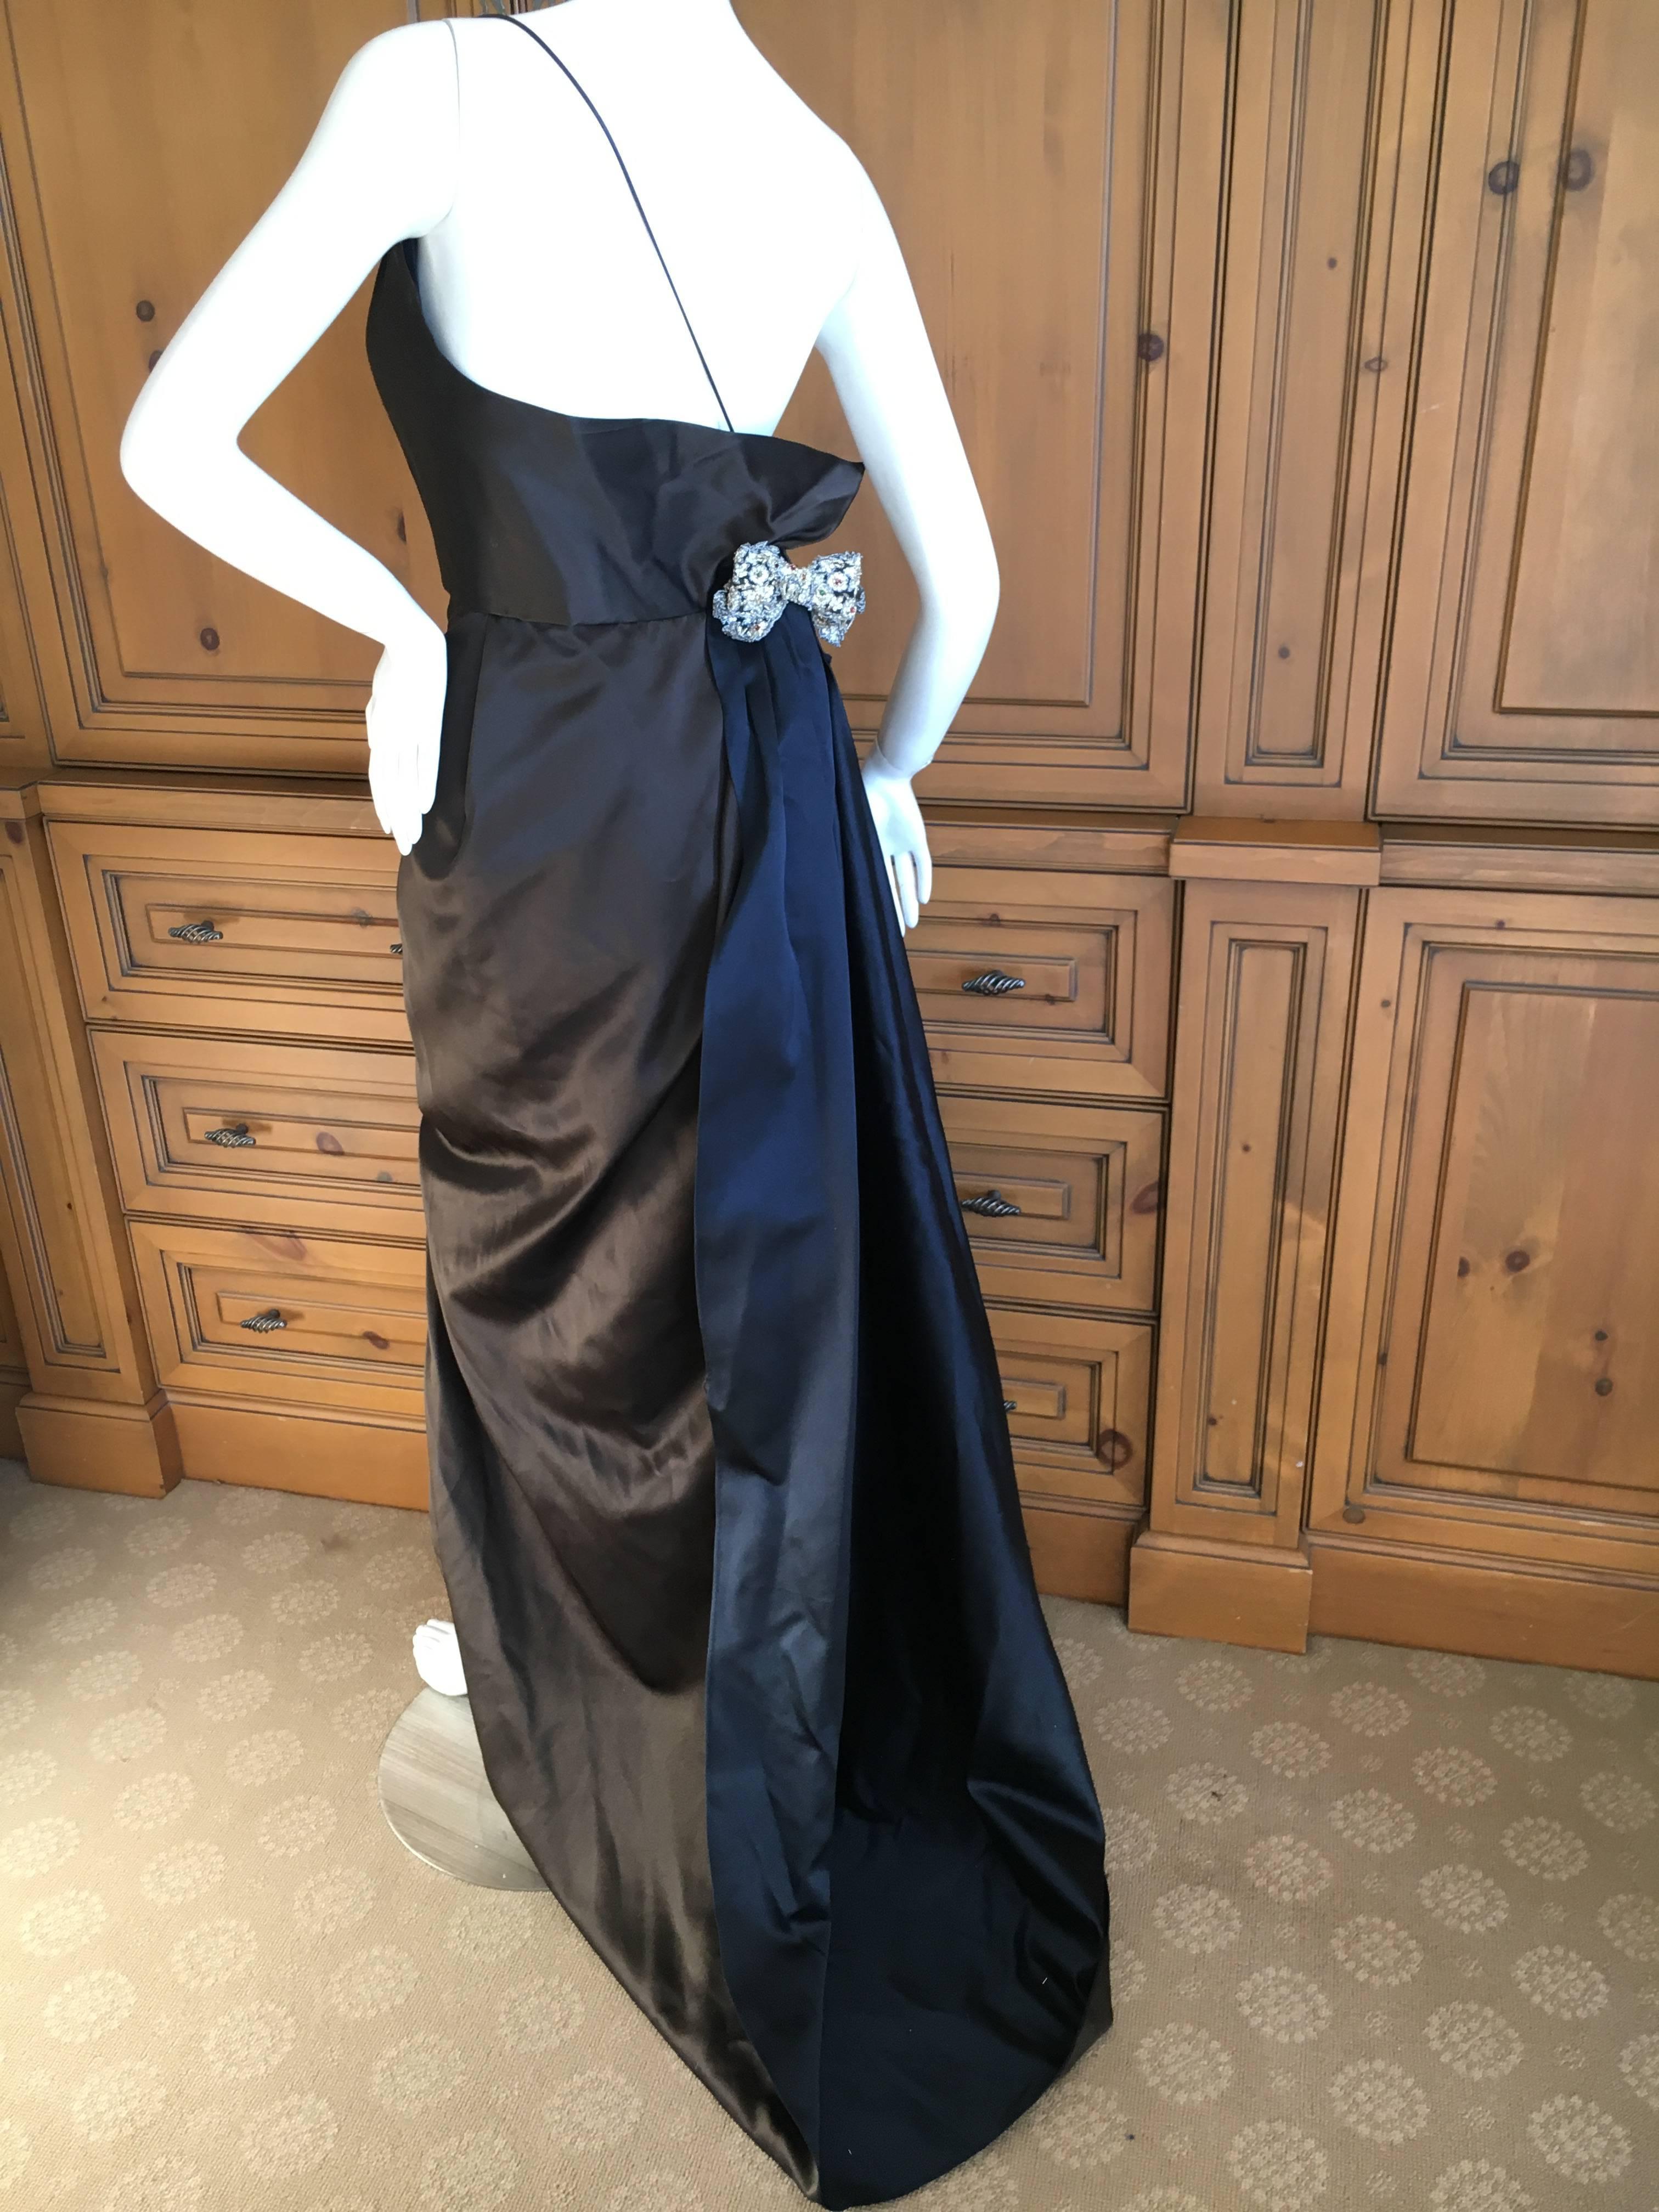 Exquisite sweeping brown silk evening dress with navy blue underside, and embellished bows on the hip and shoulder.

This is so pretty , the photos don't quite capture the charm.
Size 2
Bust 34"
Waist 24"
Hips 40"
Length